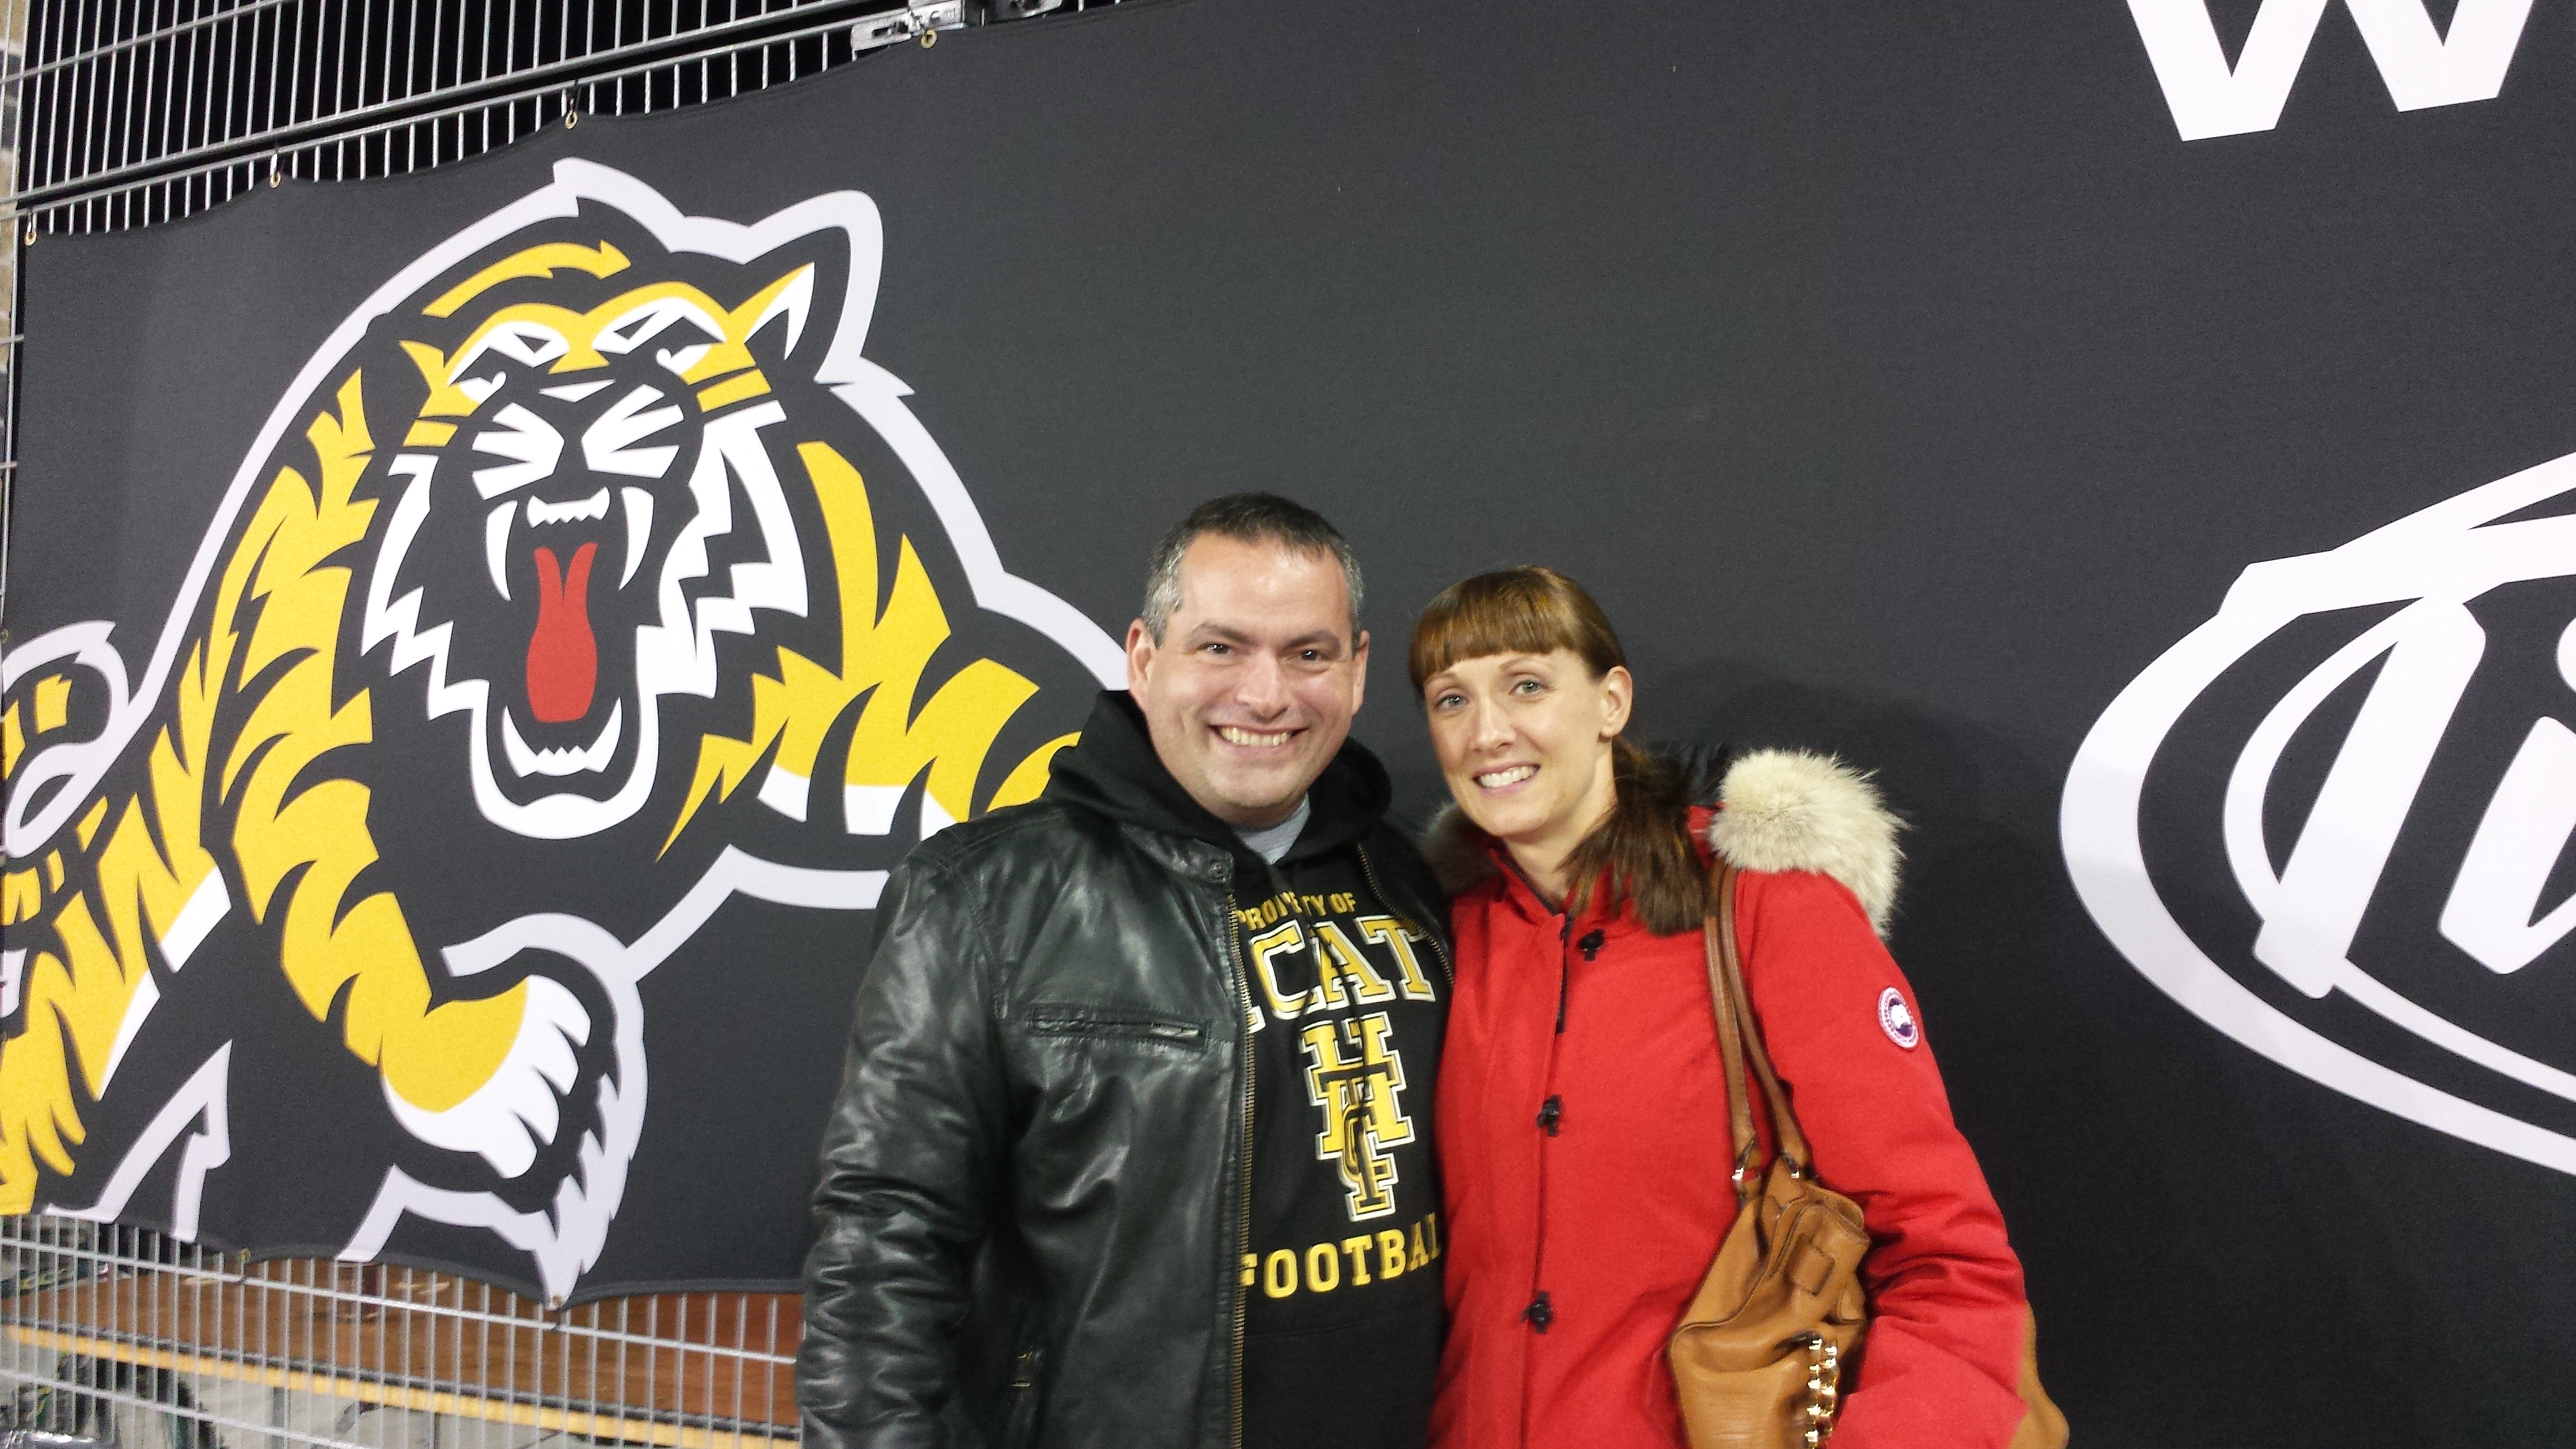 XPolice President Ivon Fournier and his wife Karen supporting the Hamilton Tiger-Cats at the game on Friday, October 17, 2014